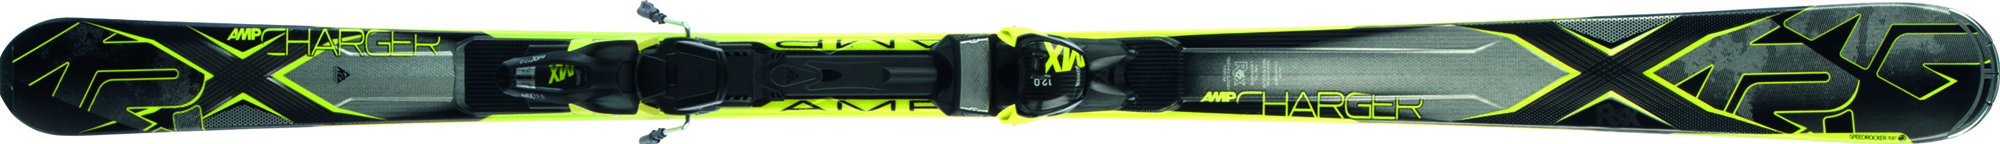 Sci k2' Charger-ROX MX 12.0